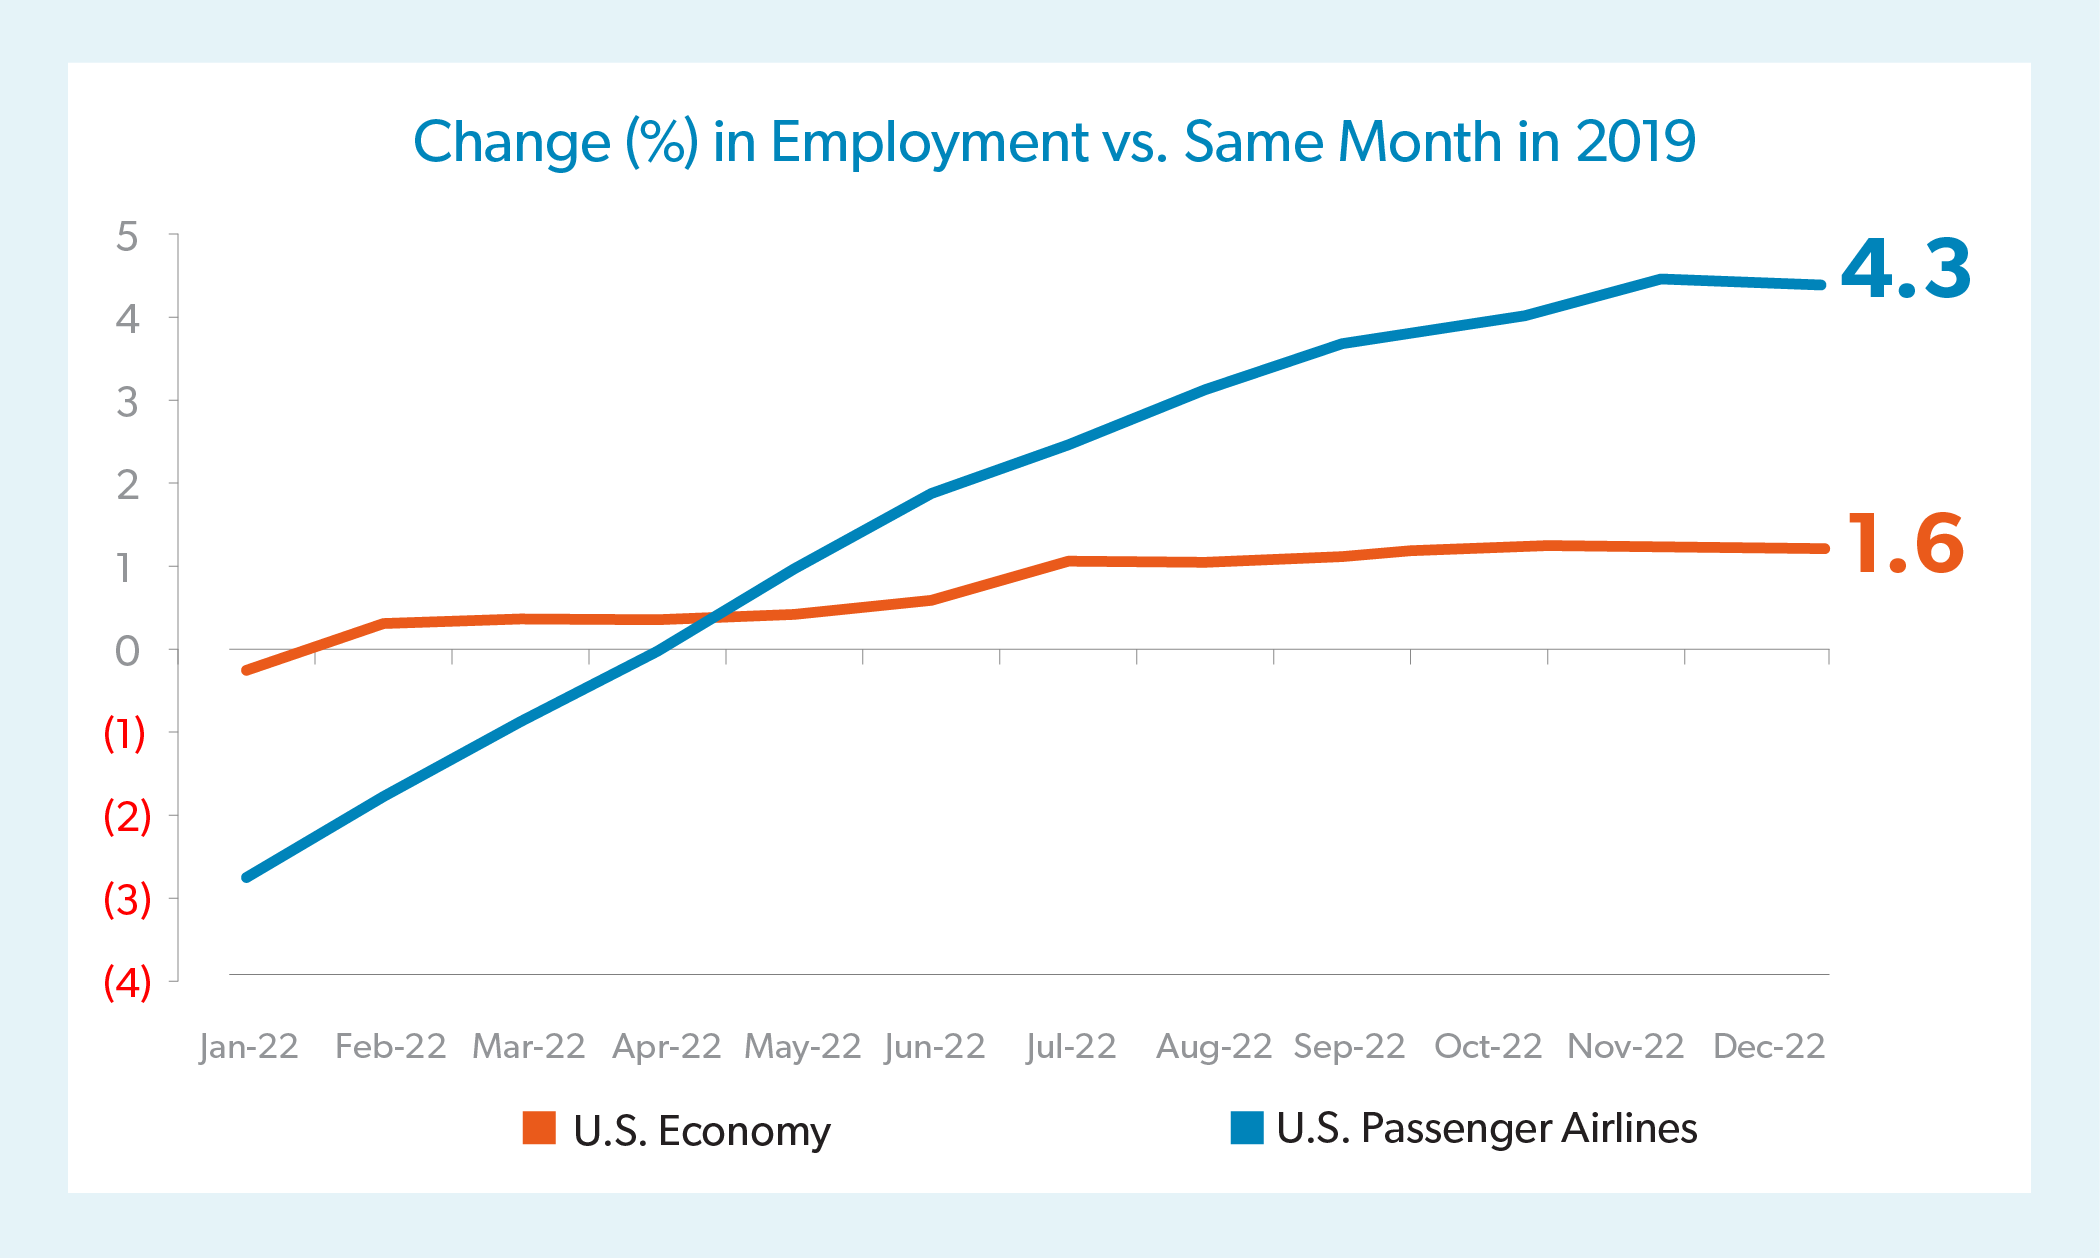 U.S. Passenger Airline Job Growth is Outpacing Overall U.S. Job Growth